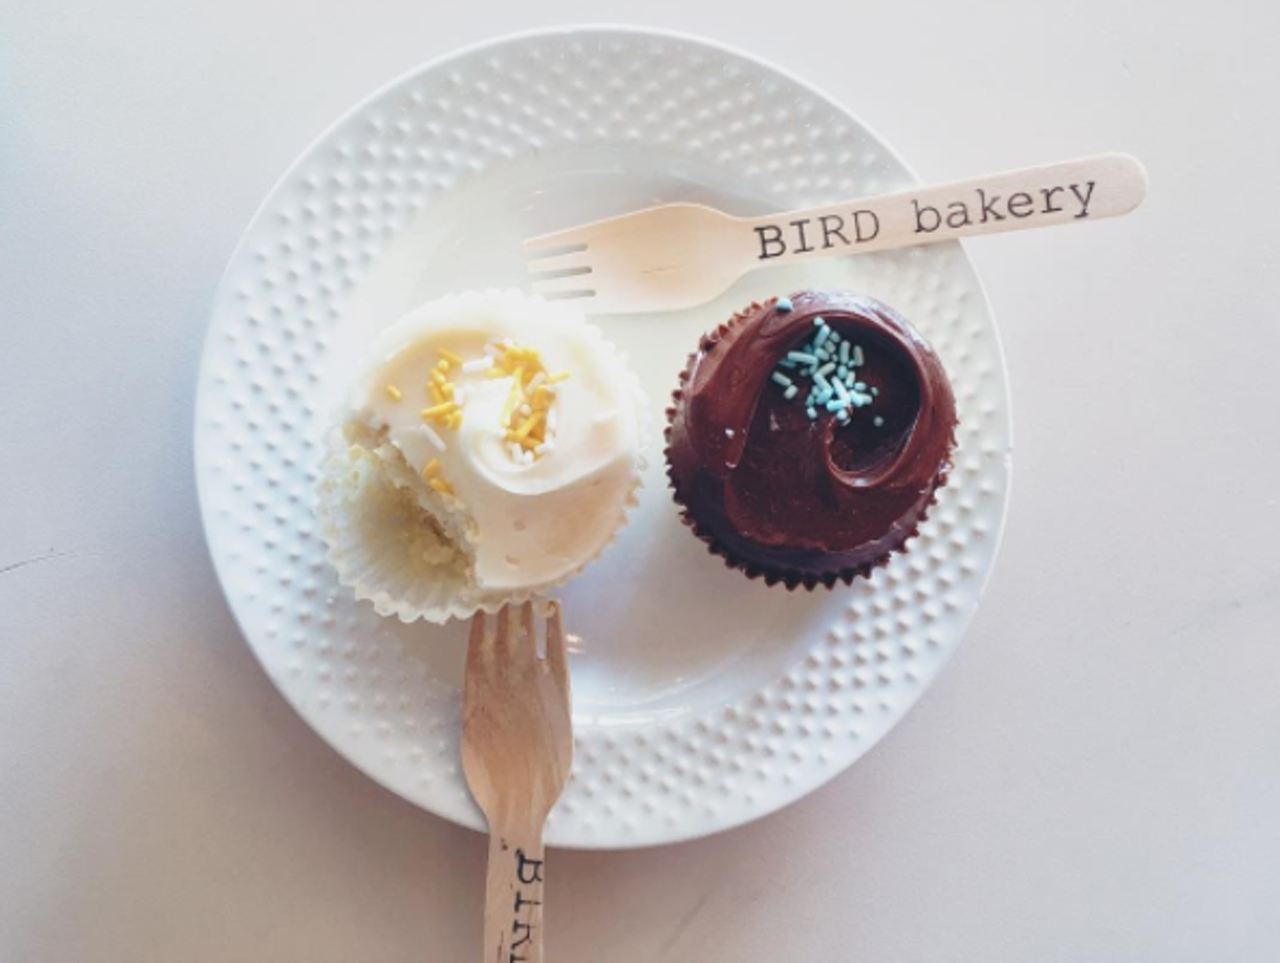 Bird Bakery
5912 Broadway, (210) 804-2473
Stop in for a savory quiche for breakfast, a toasty sandwich for lunch or a tasty treat anytime of the day. Bird Bakery is your one-stop-shop for pies, cookies, brownies, and everything else your sweet tooth desires. 
Photo via Instagram,  chloekait